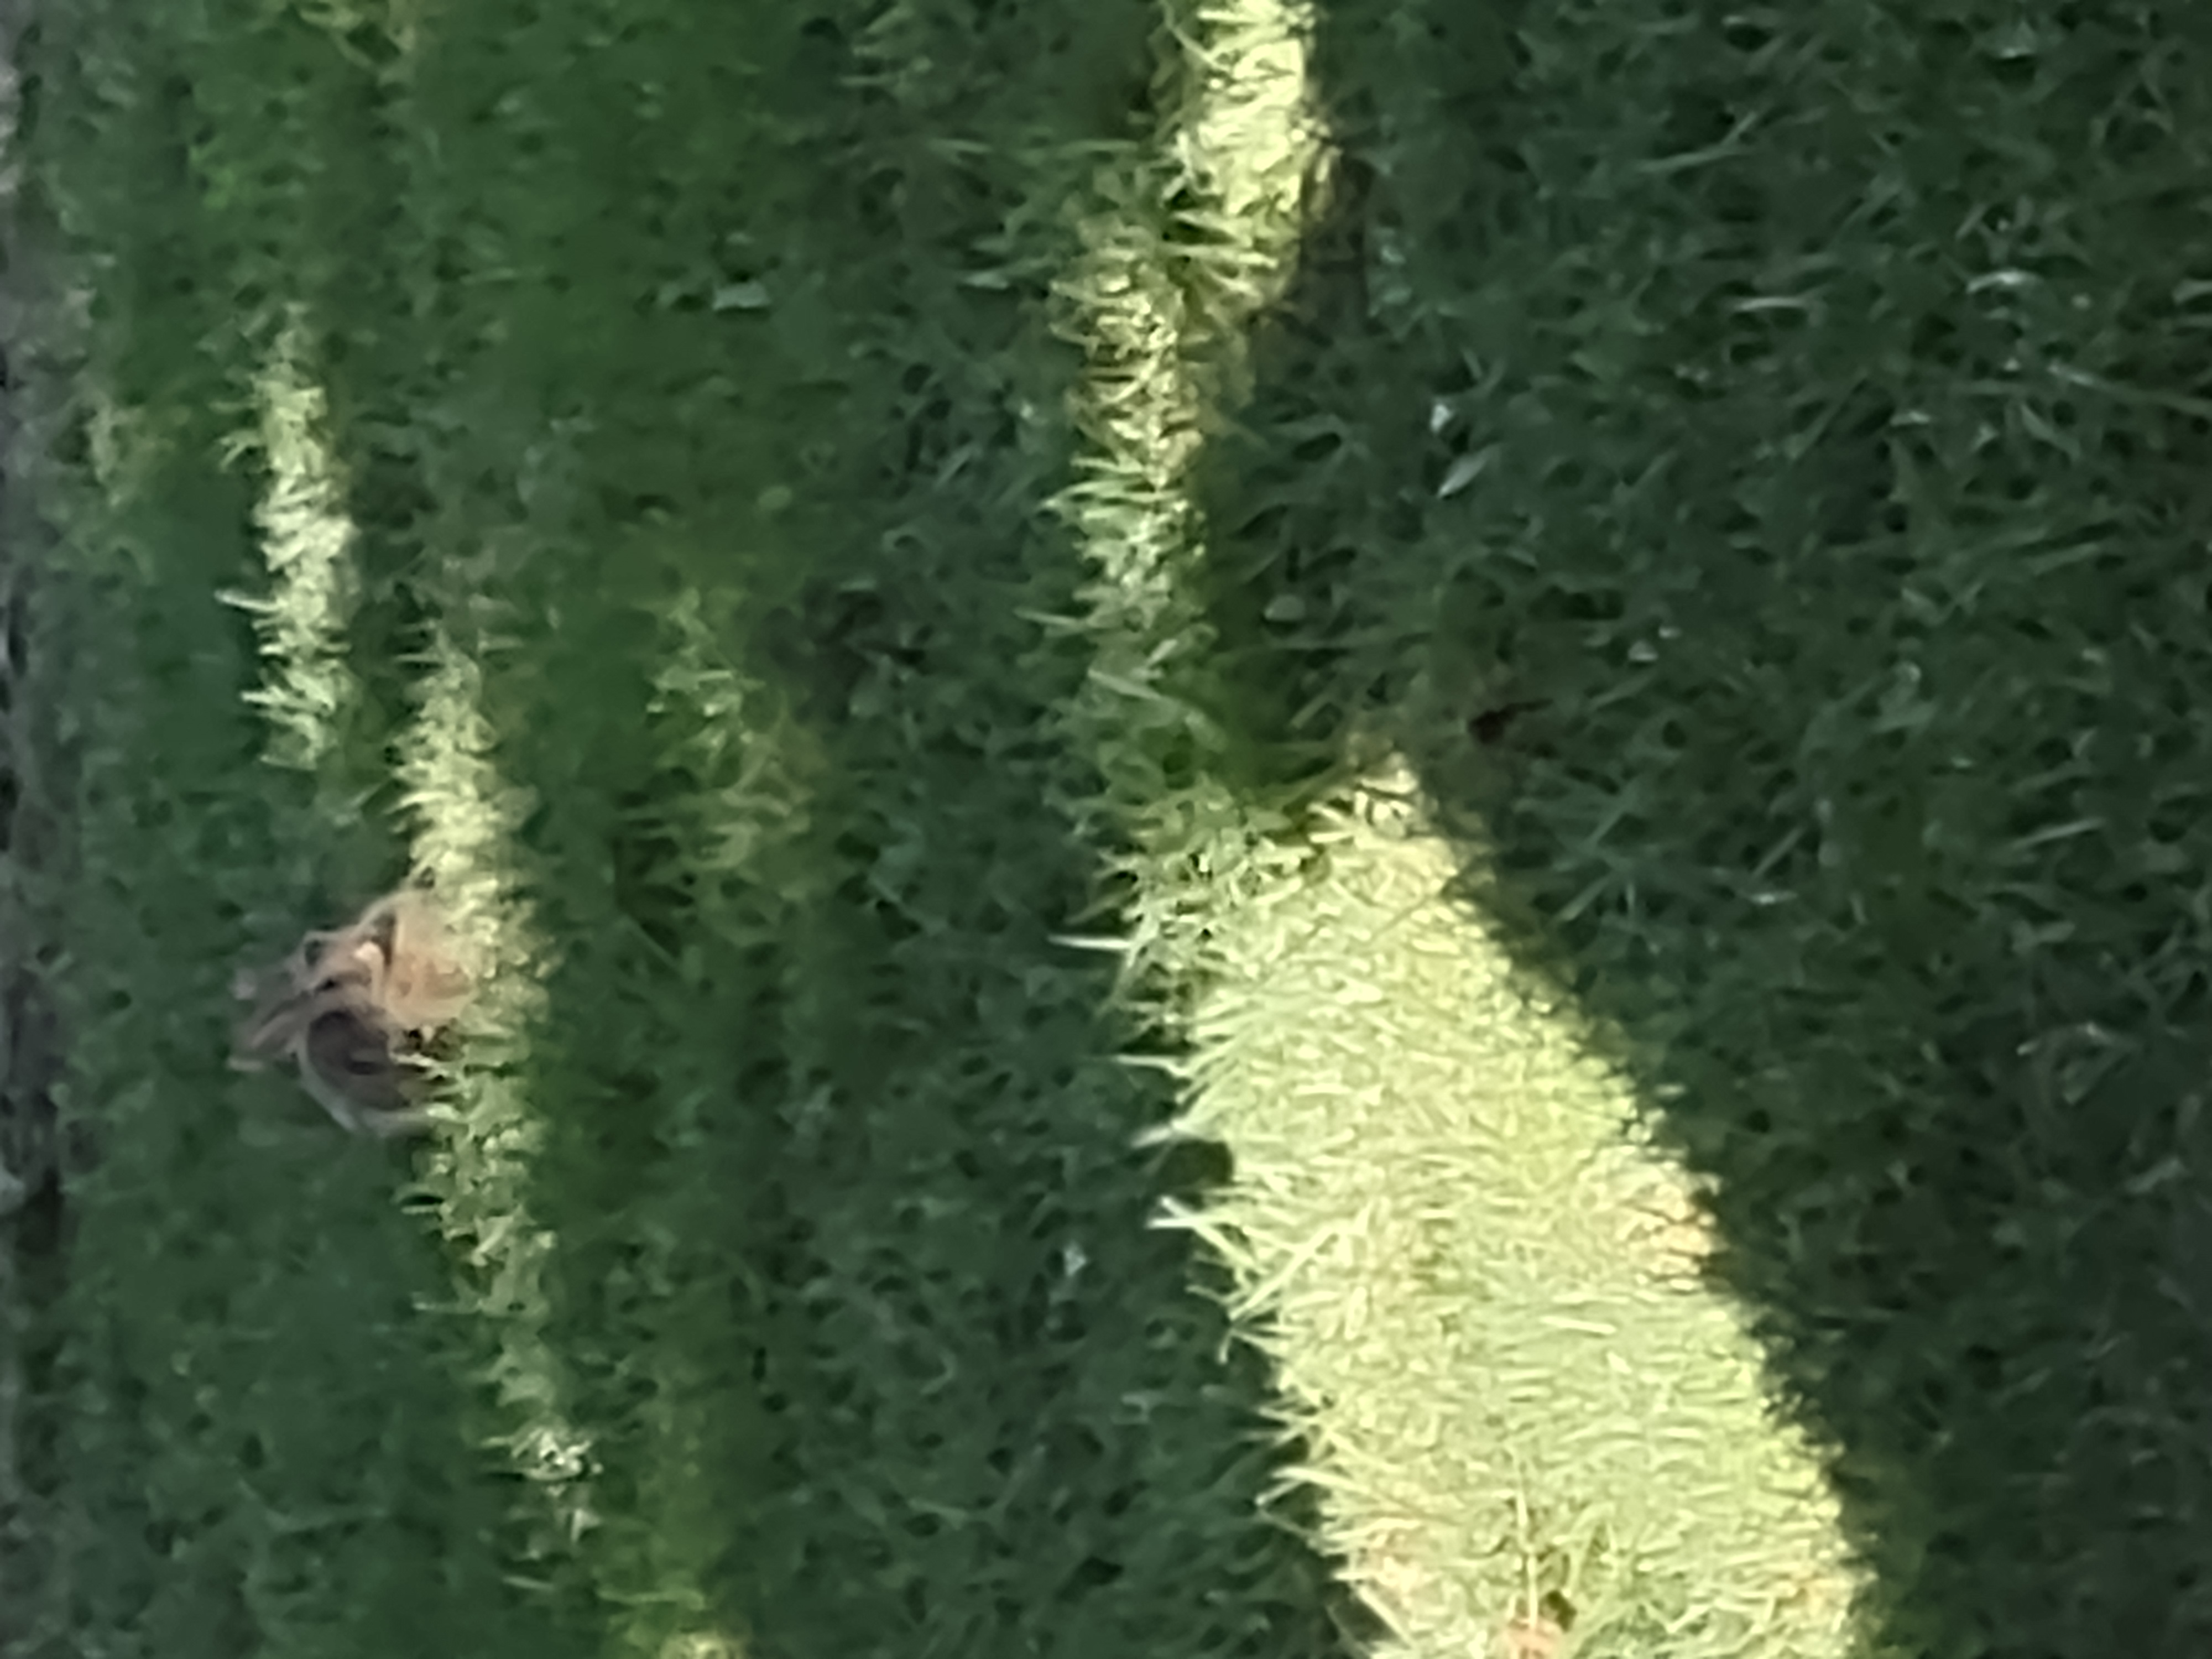 bunny hiding in the grass I took